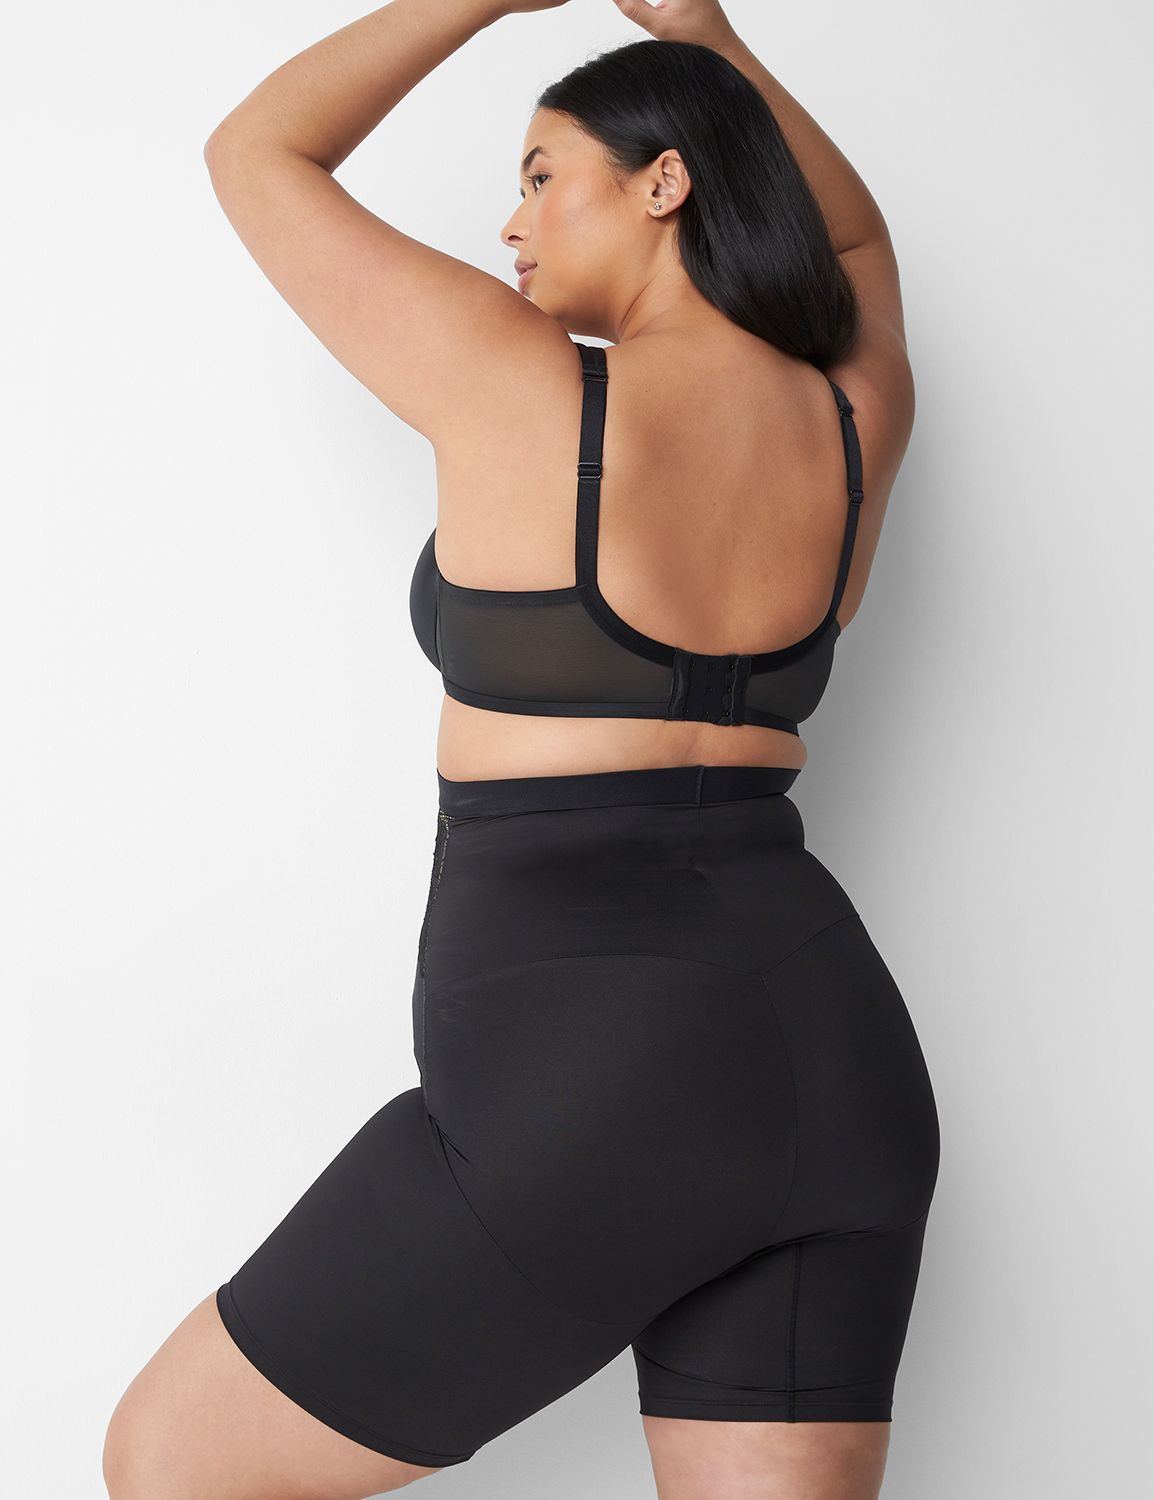 LANE BRYANT CACIQUE The Slimmer Ultra High-Waist Short Shapewear Size 18/20  NWT $5.00 - PicClick